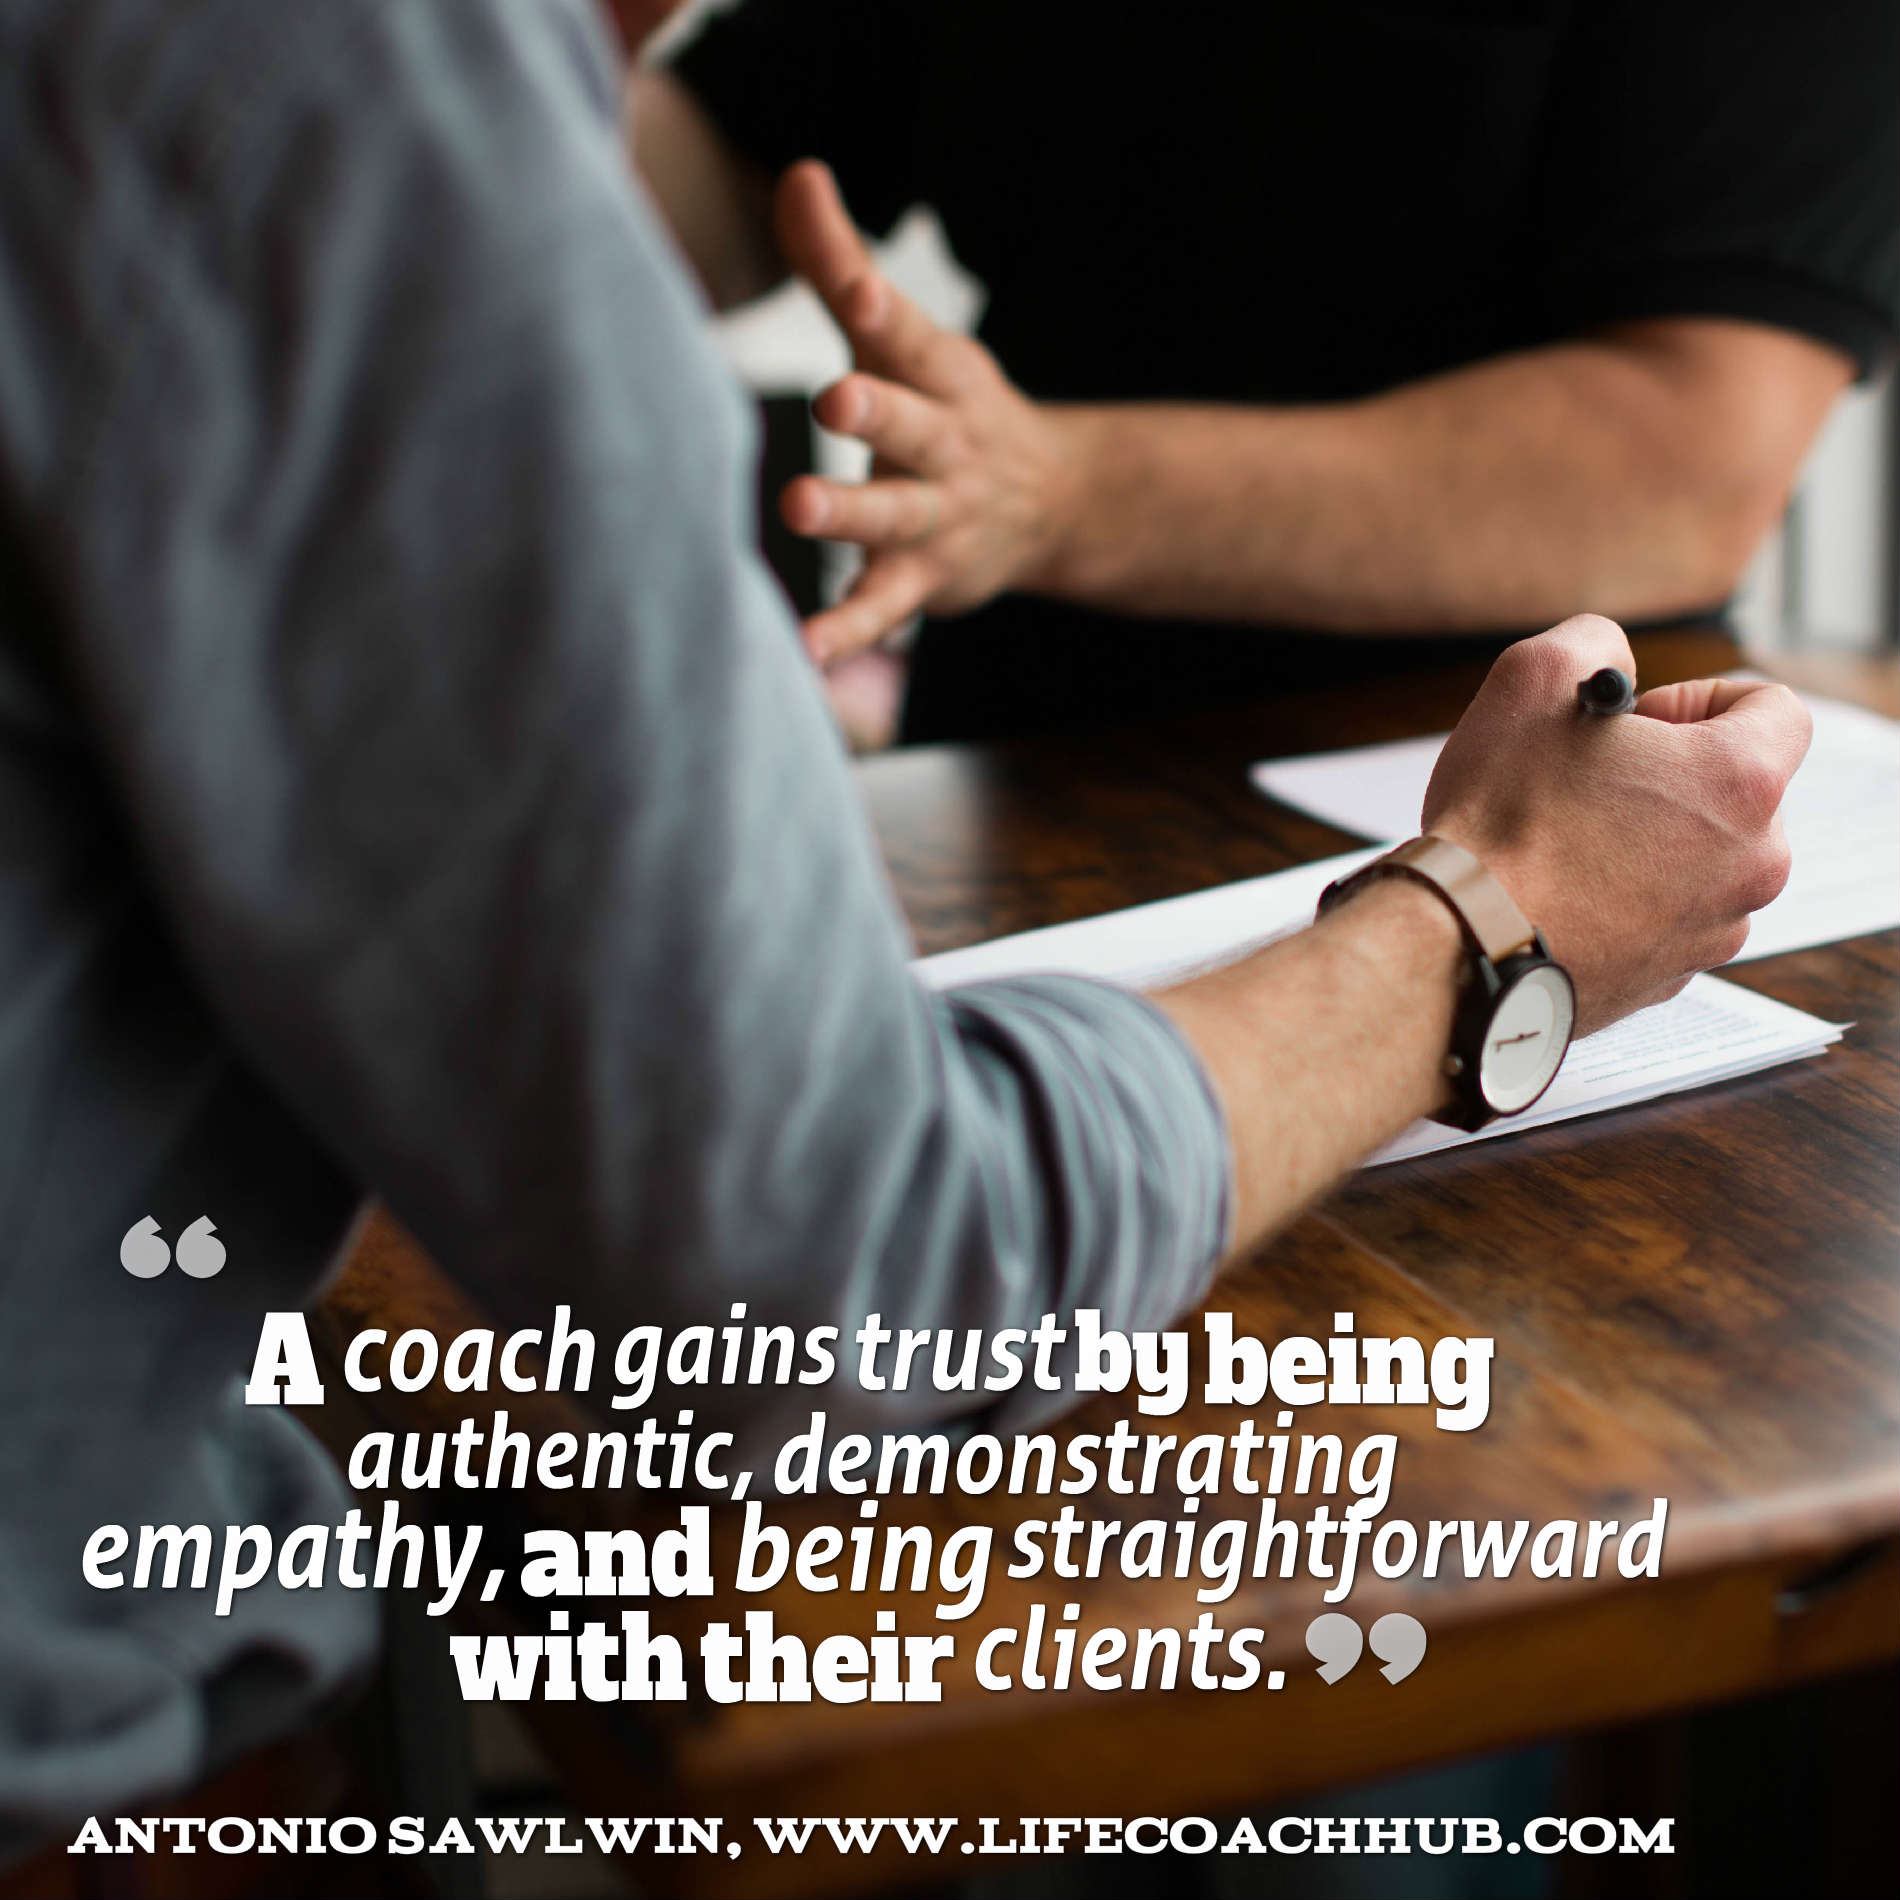 A coach gains trust by being authentic